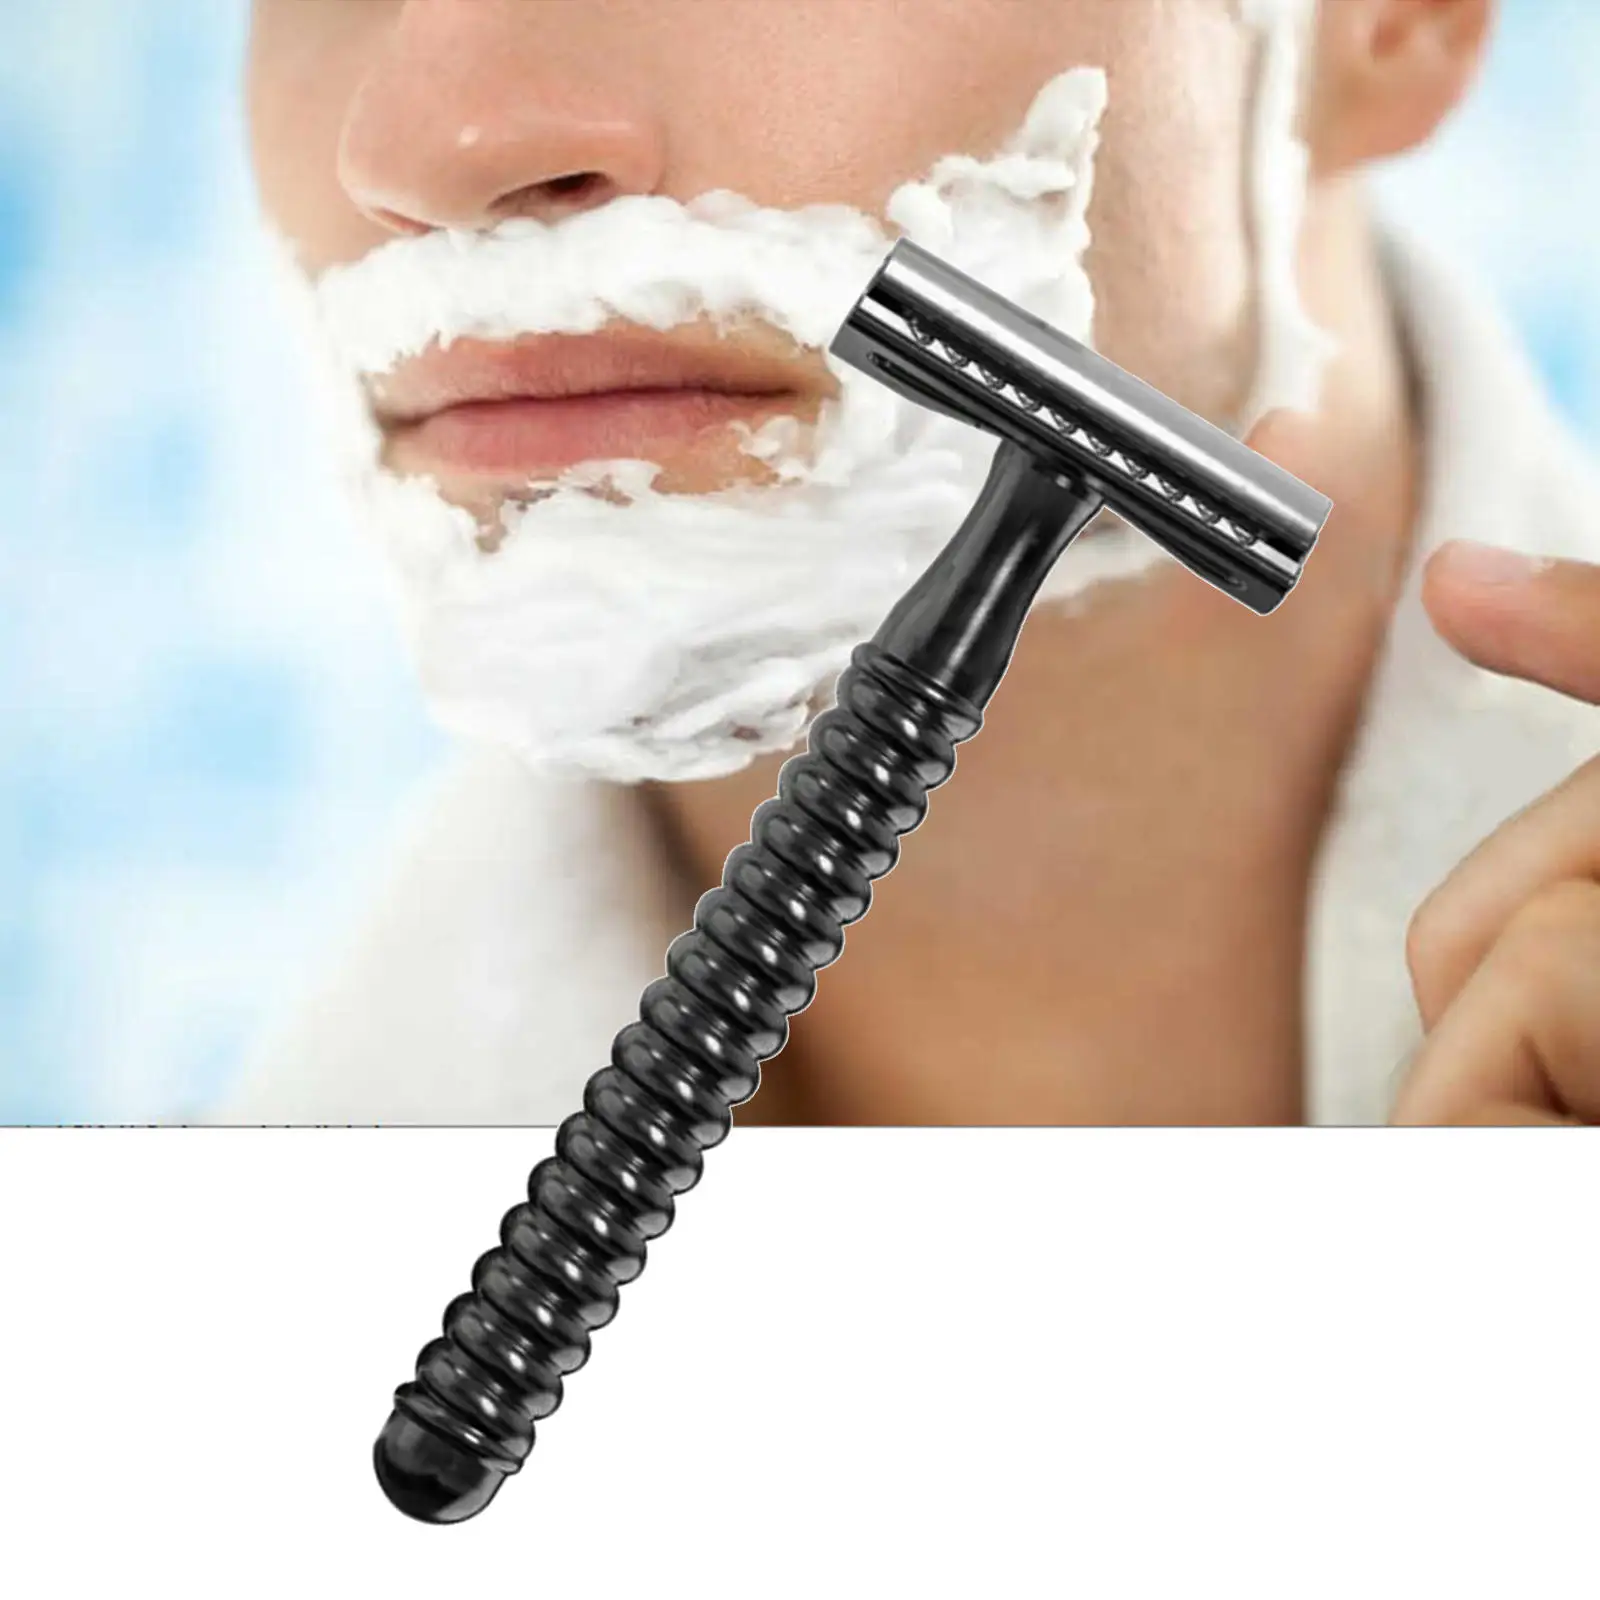 Classic Style Double Edge Safety Shaving Razor Butterfly Open Precise Shave Easy Use Gifts Durable Travel Cost Effective Stylish